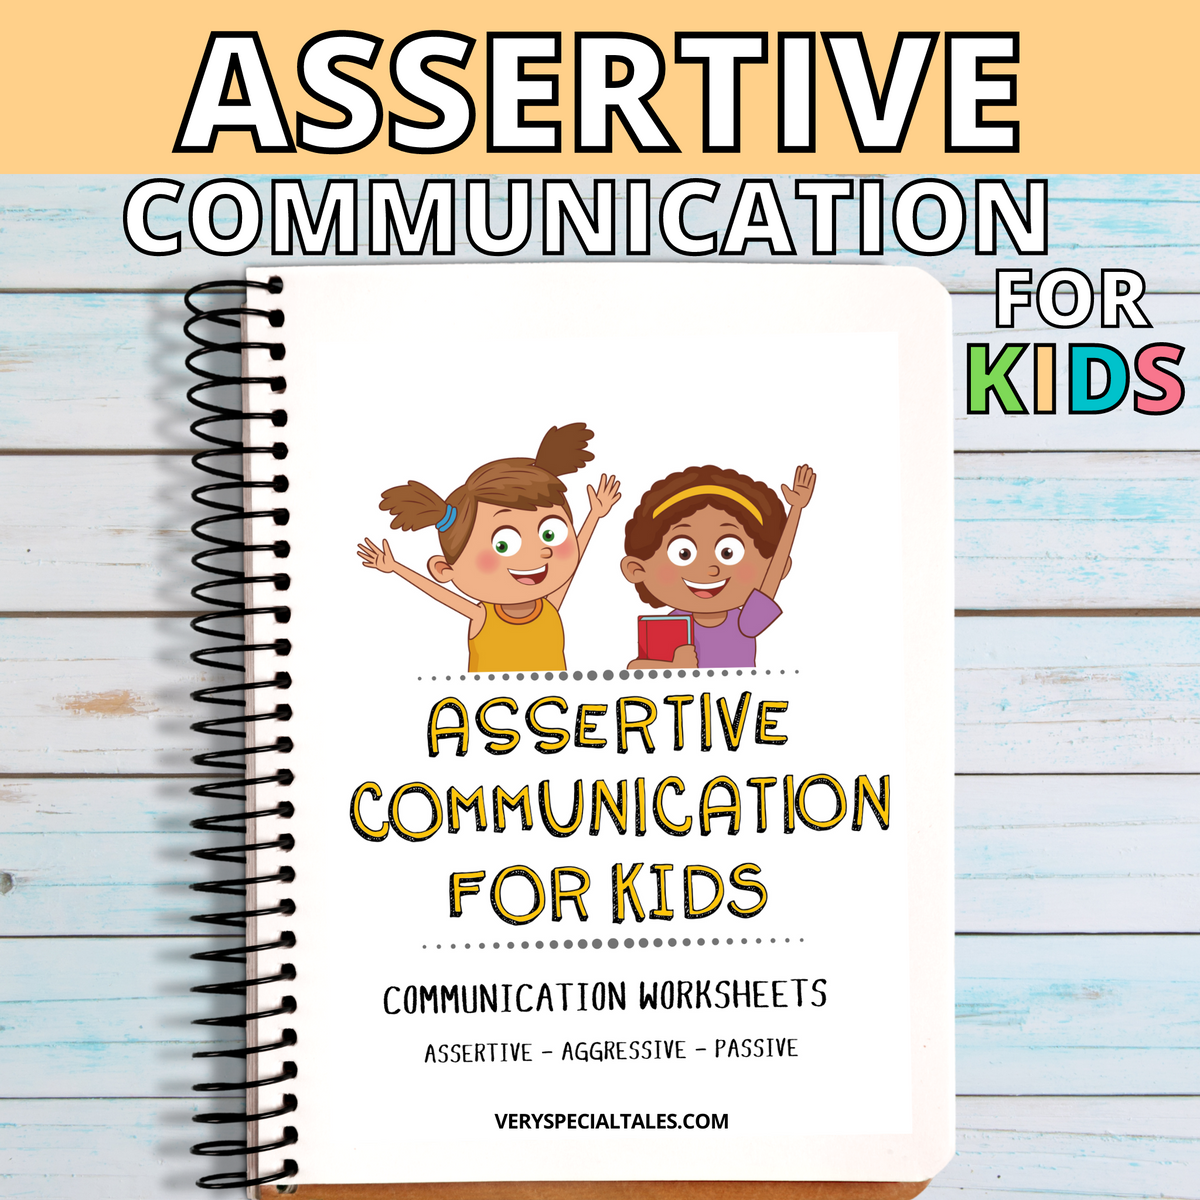 A notebook showing two kids answering questions, with the words 'Assertive Communication for Kids' underneath.